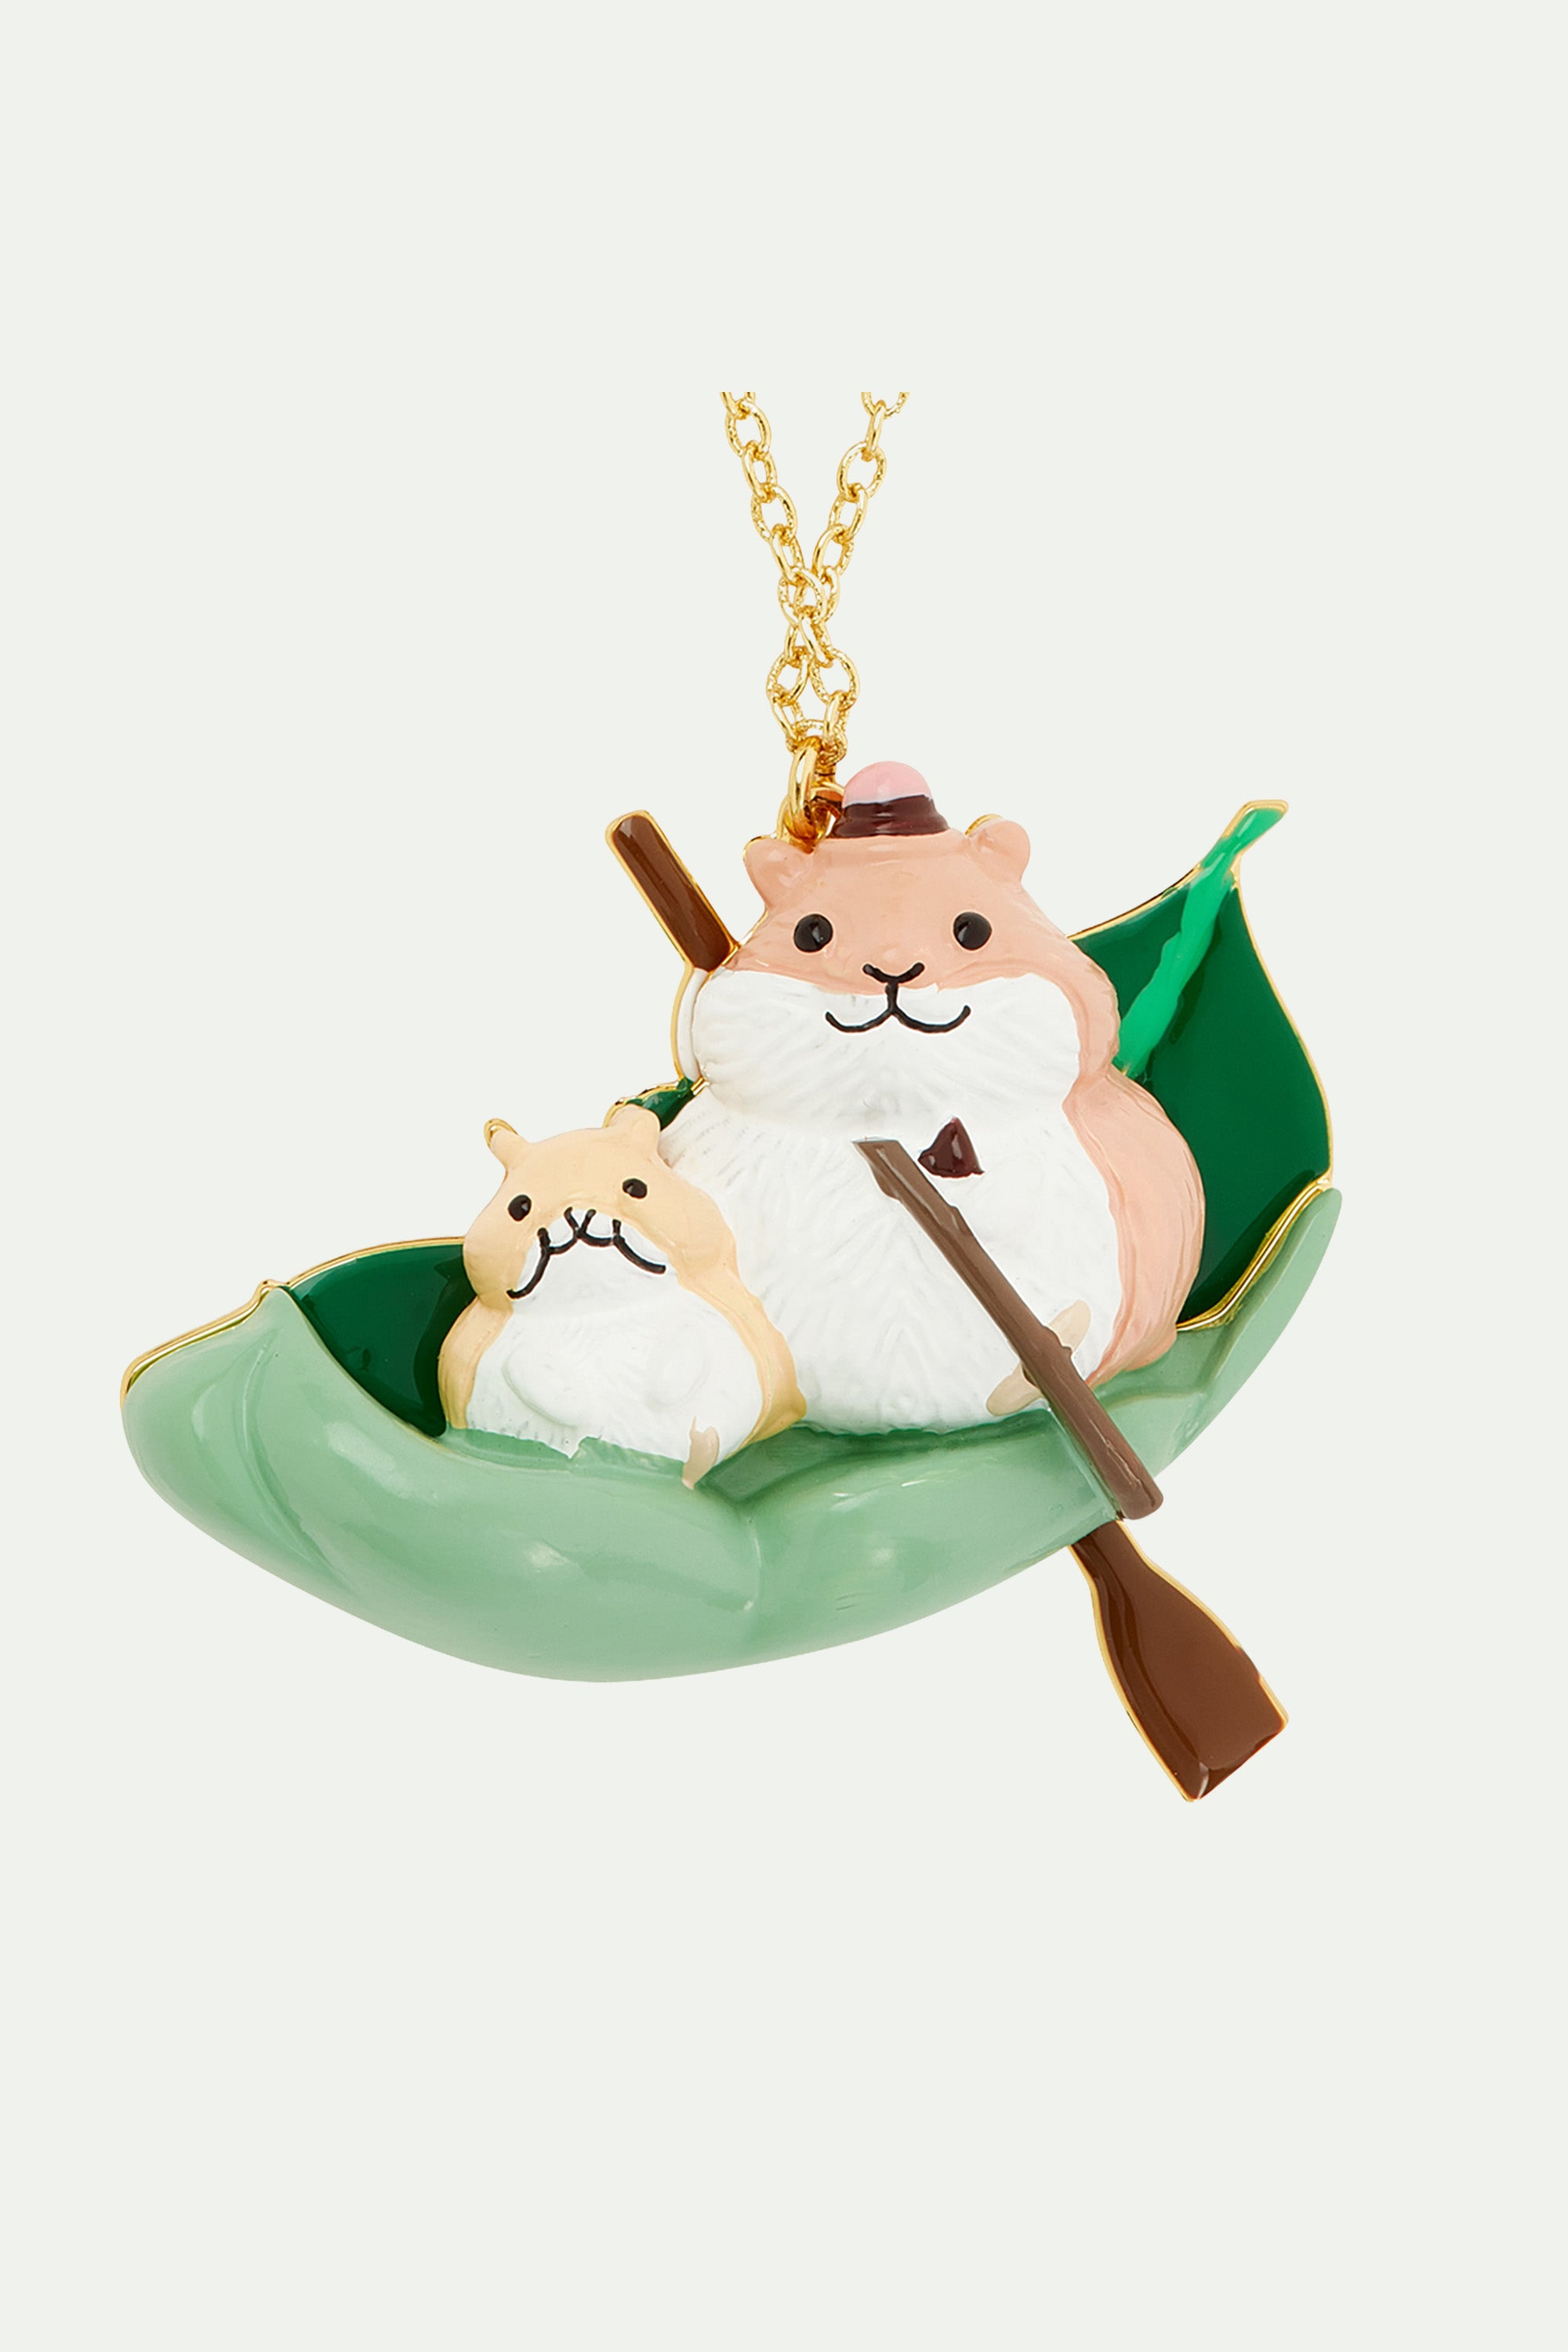 Exploring hamsters pendant necklace